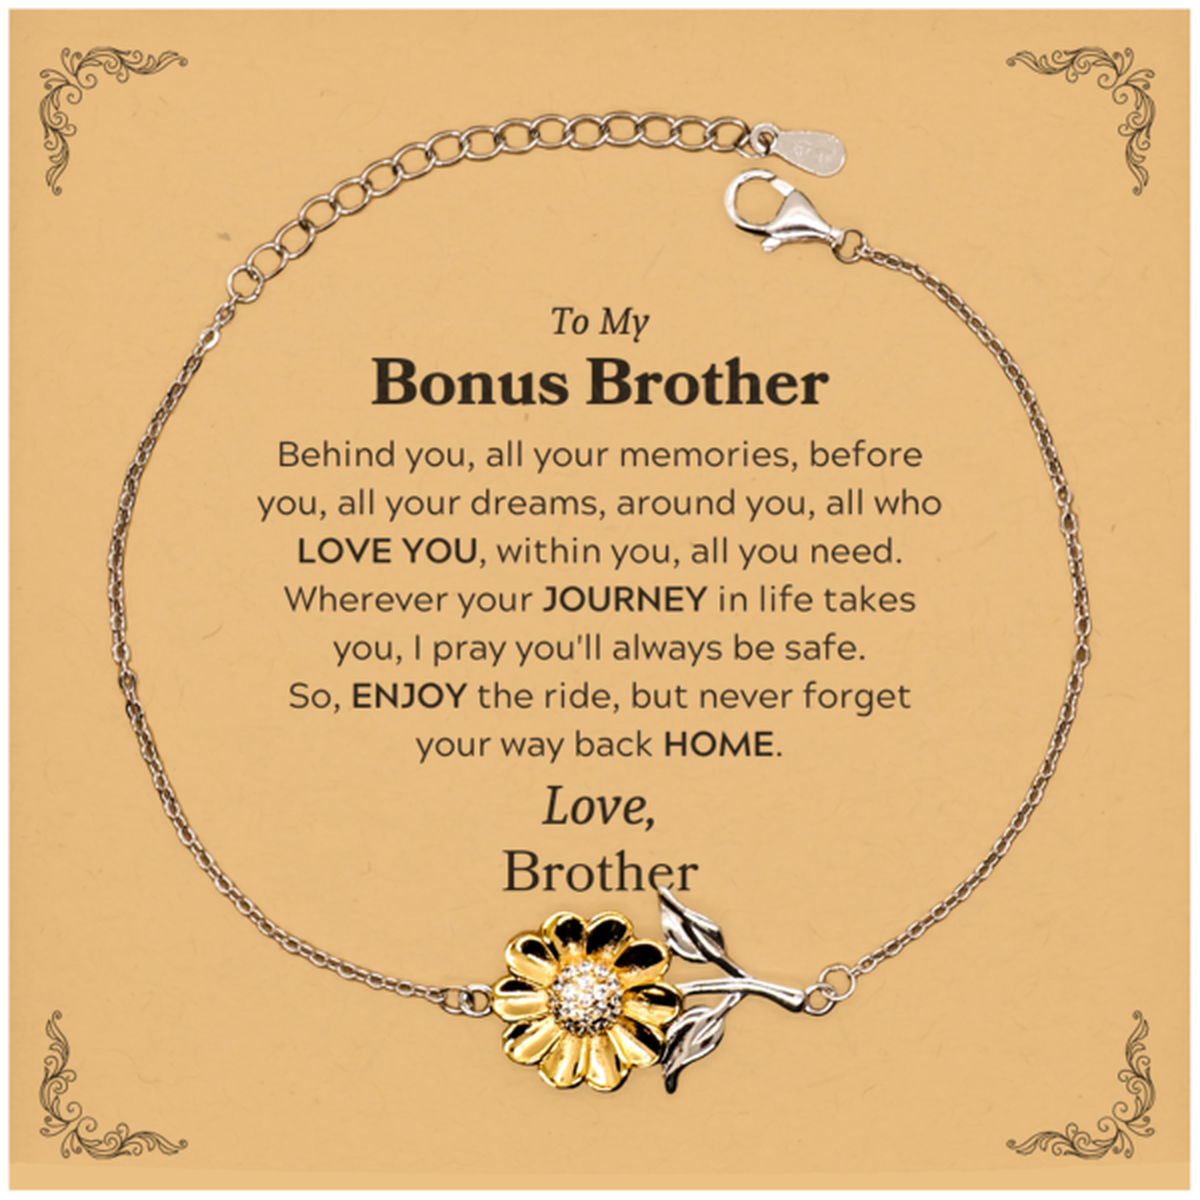 To My Bonus Brother Graduation Gifts from Brother, Bonus Brother Sunflower Bracelet Christmas Birthday Gifts for Bonus Brother Behind you, all your memories, before you, all your dreams. Love, Brother